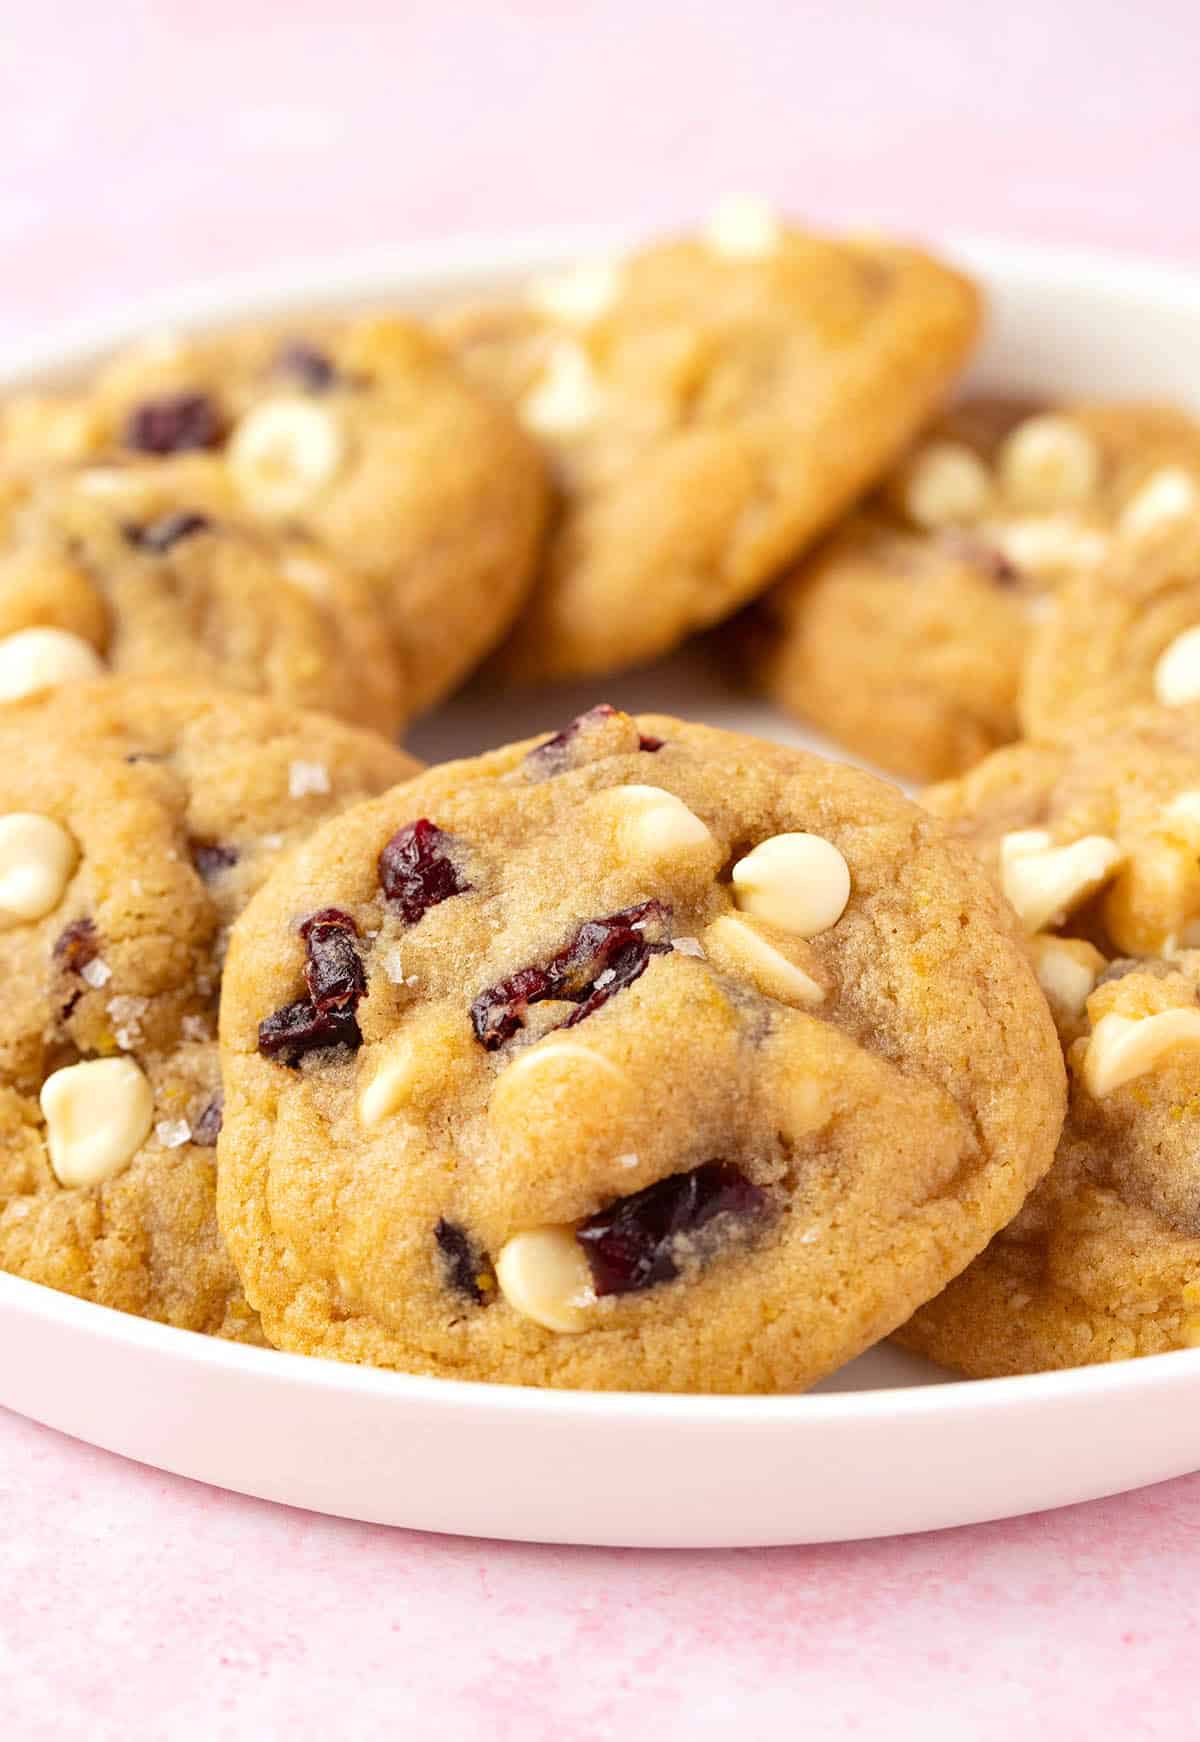 A plate of homemade White Chocolate Cranberry Cookies.